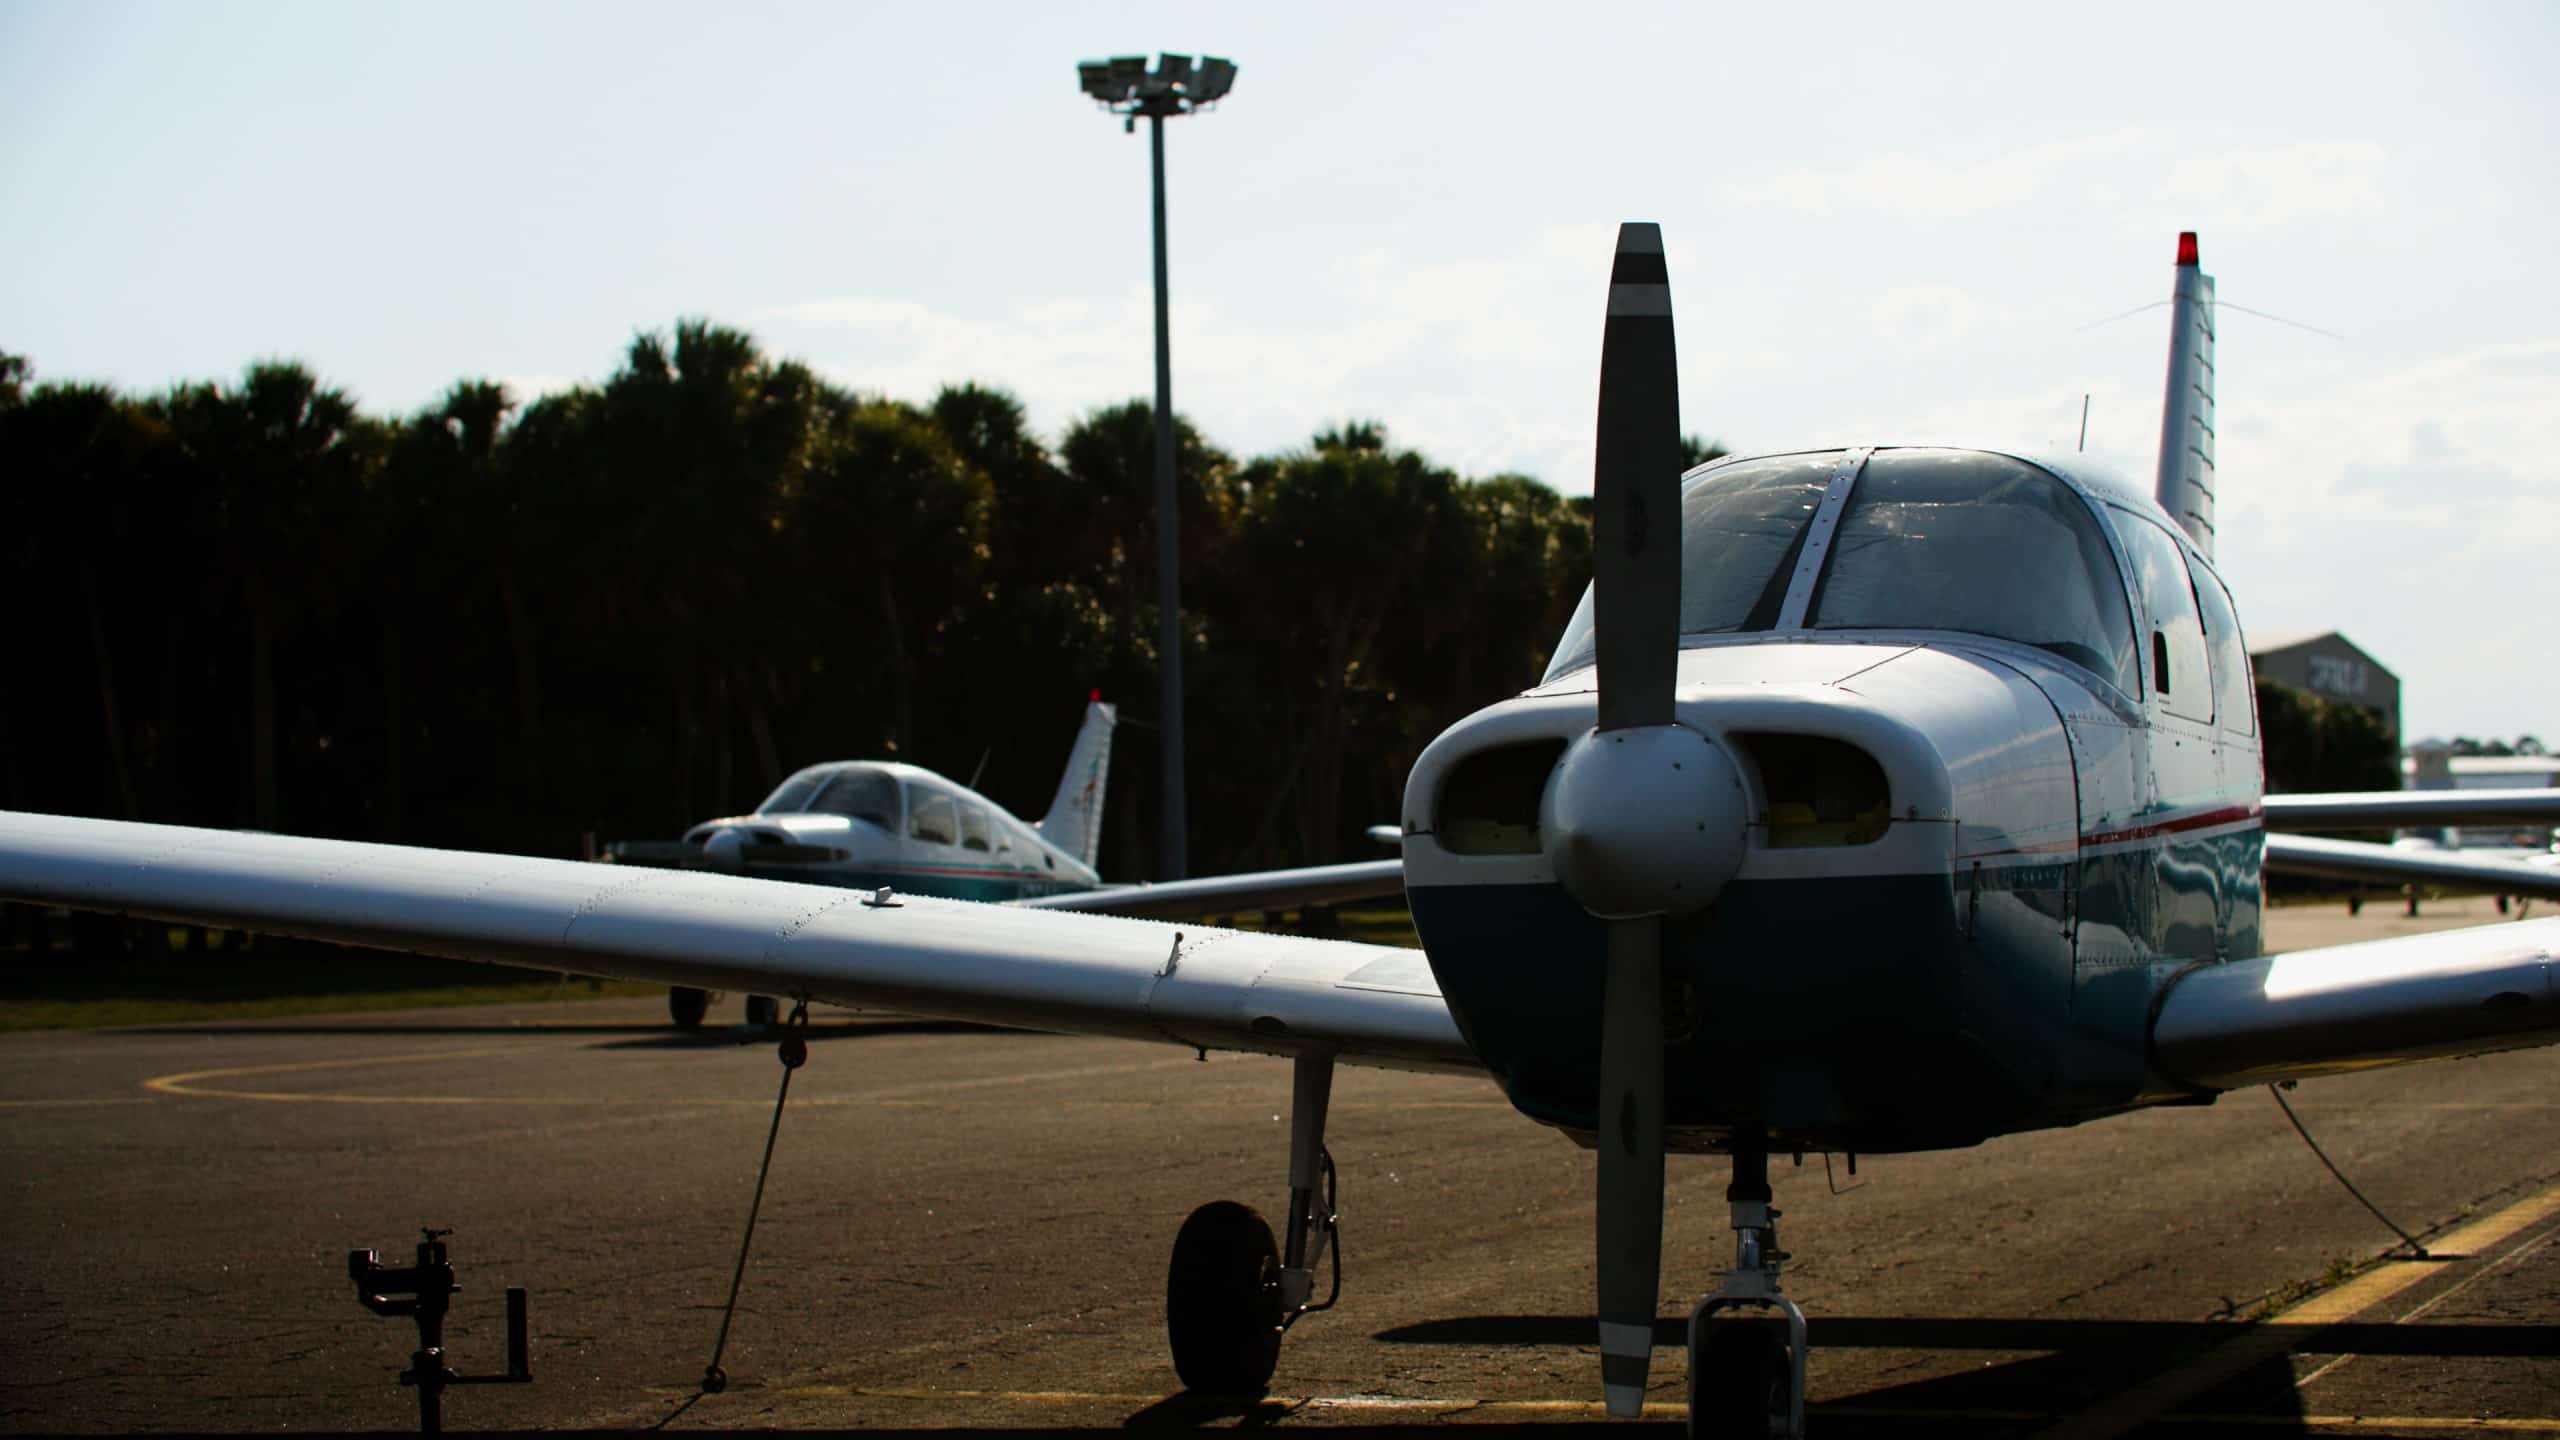 Front view of the propellor of a small airplane parked on the tarmac